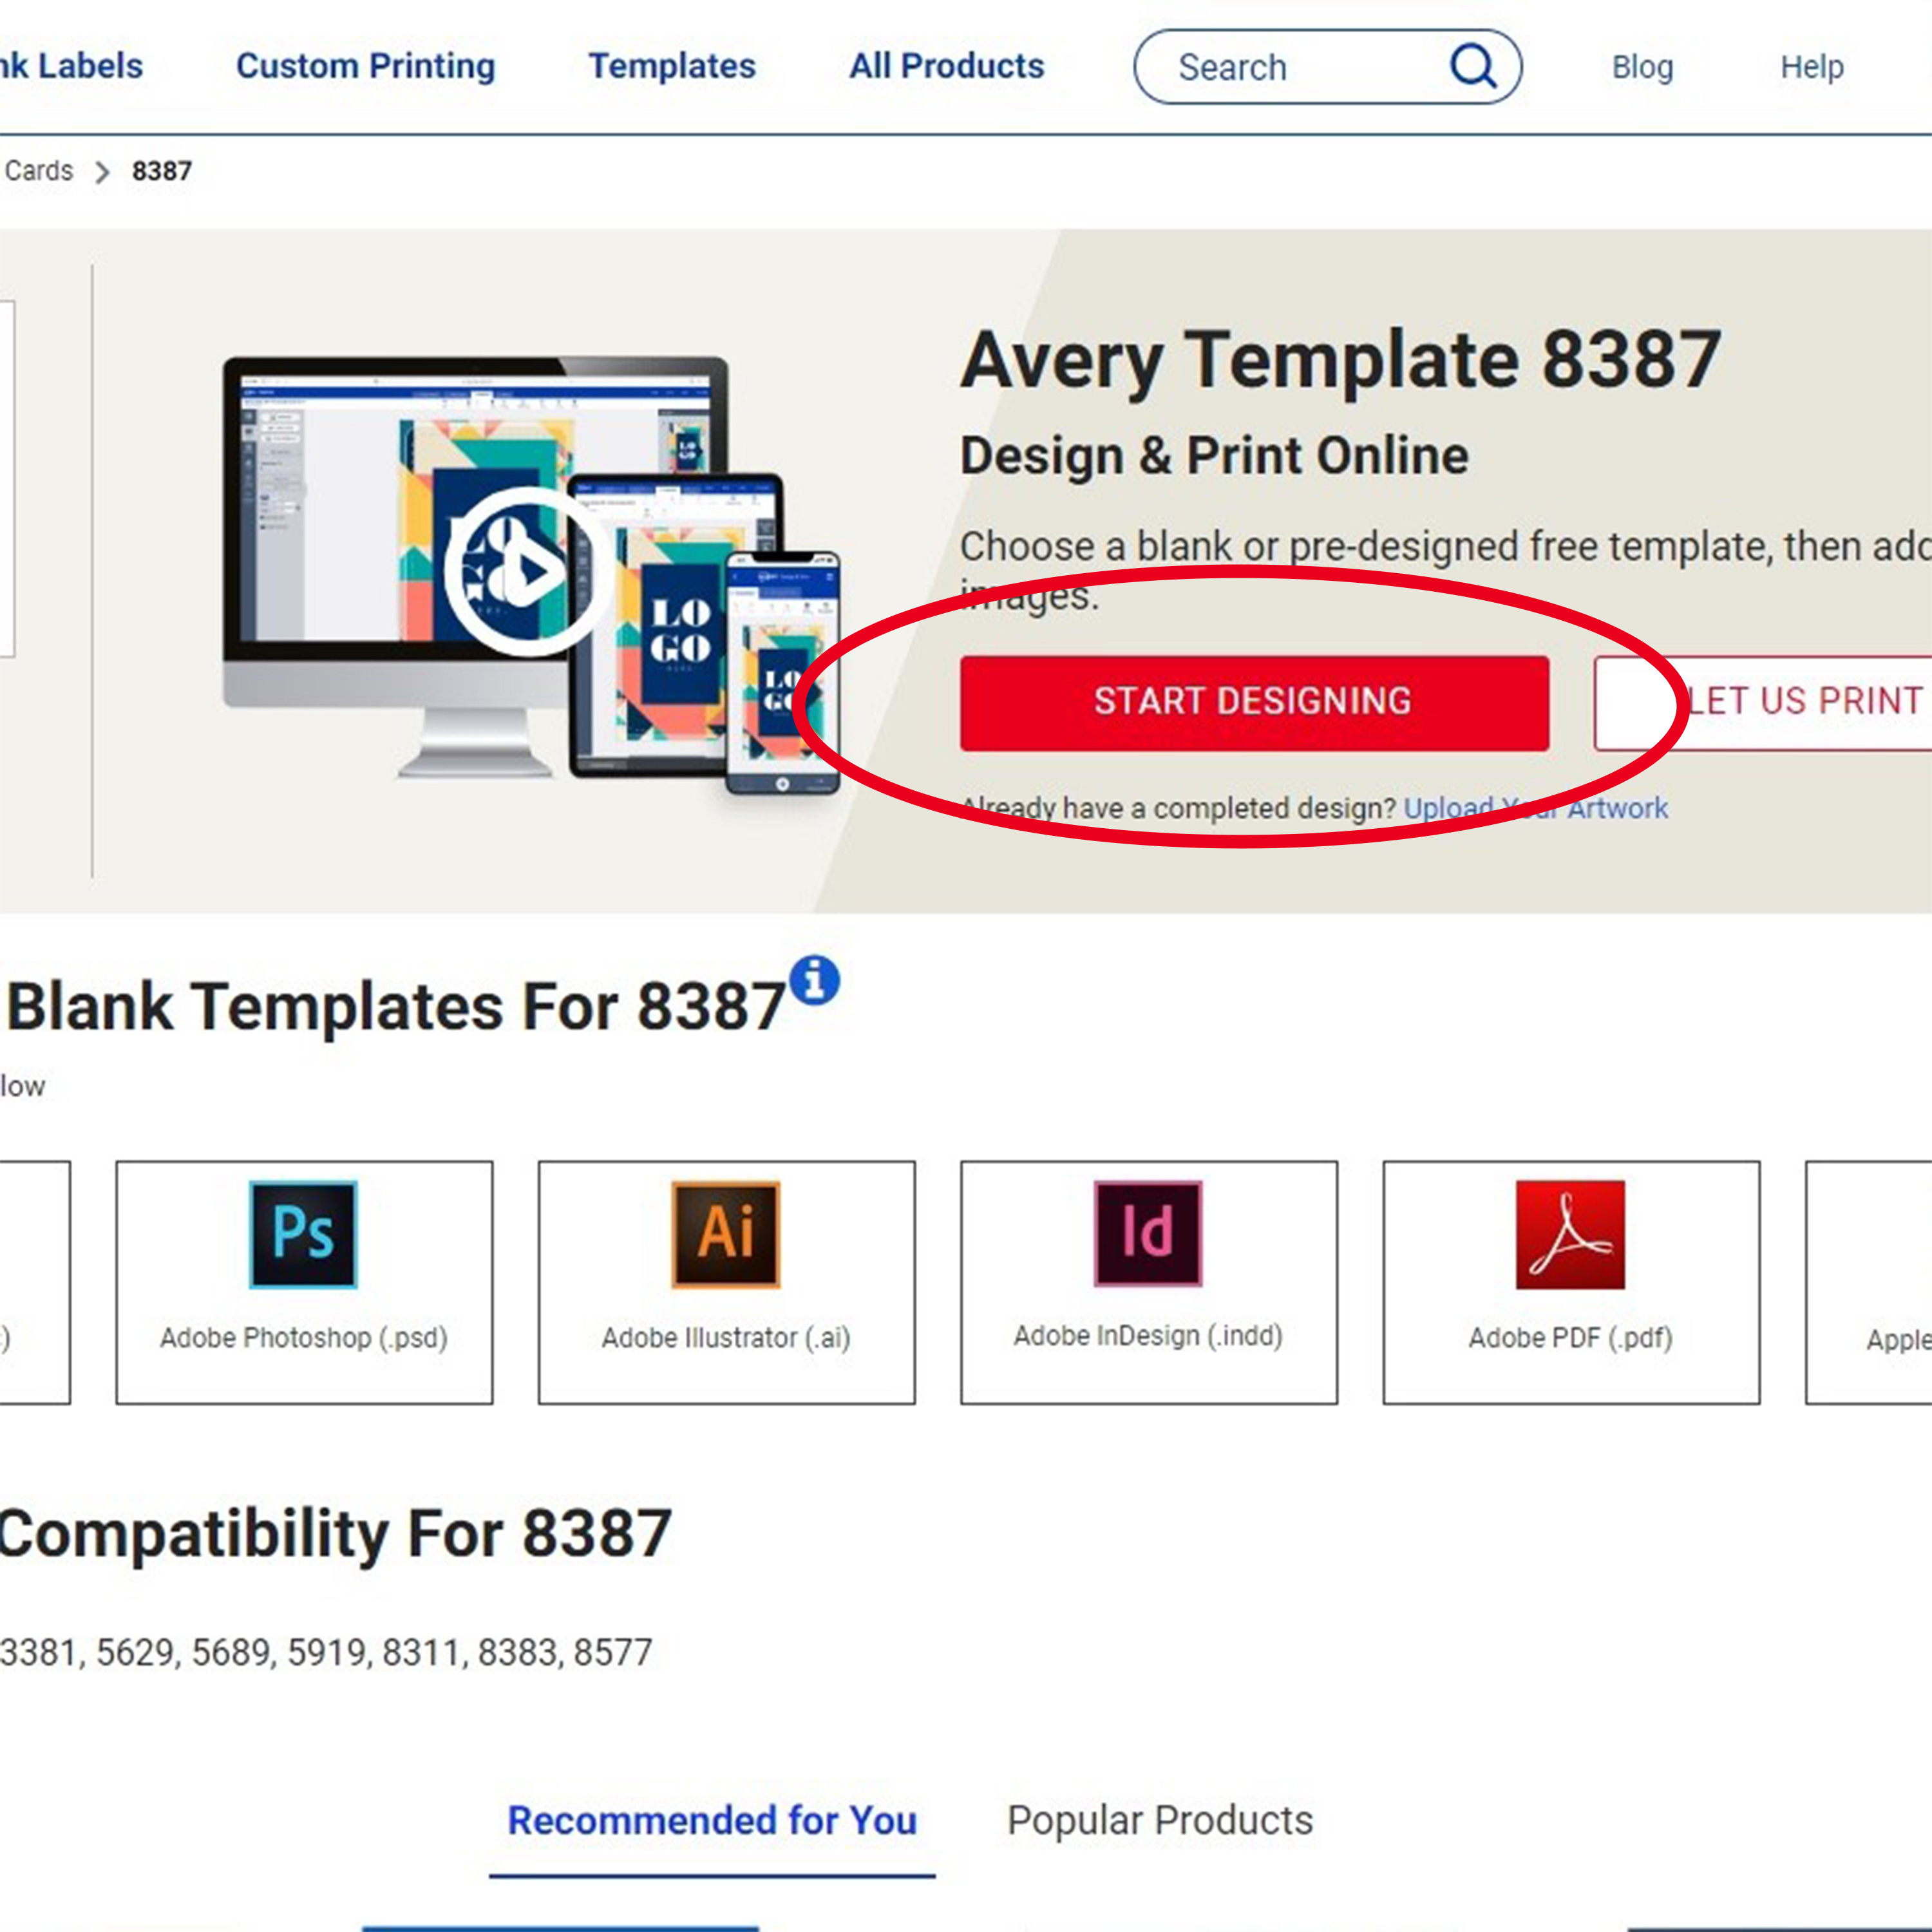 A screenshot of the template page for Avery card product 8387. the screenshot shows where to click to start designing using Avery Design and Print Online software.